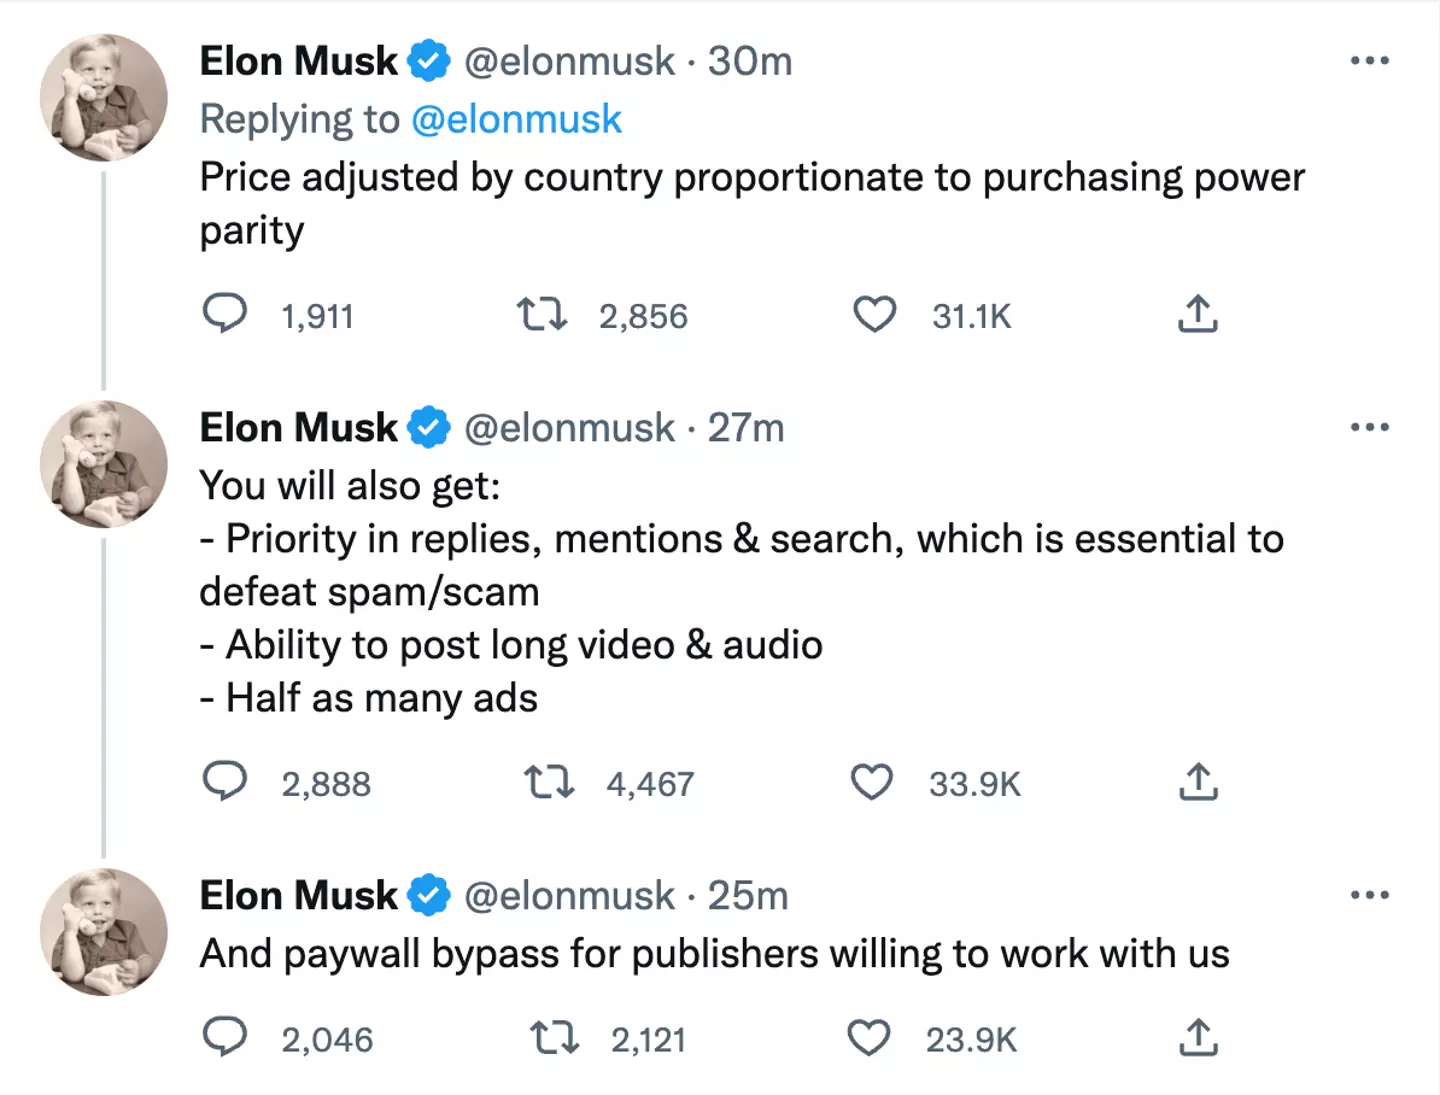 Musk has confirmed divisive changes to the platform.